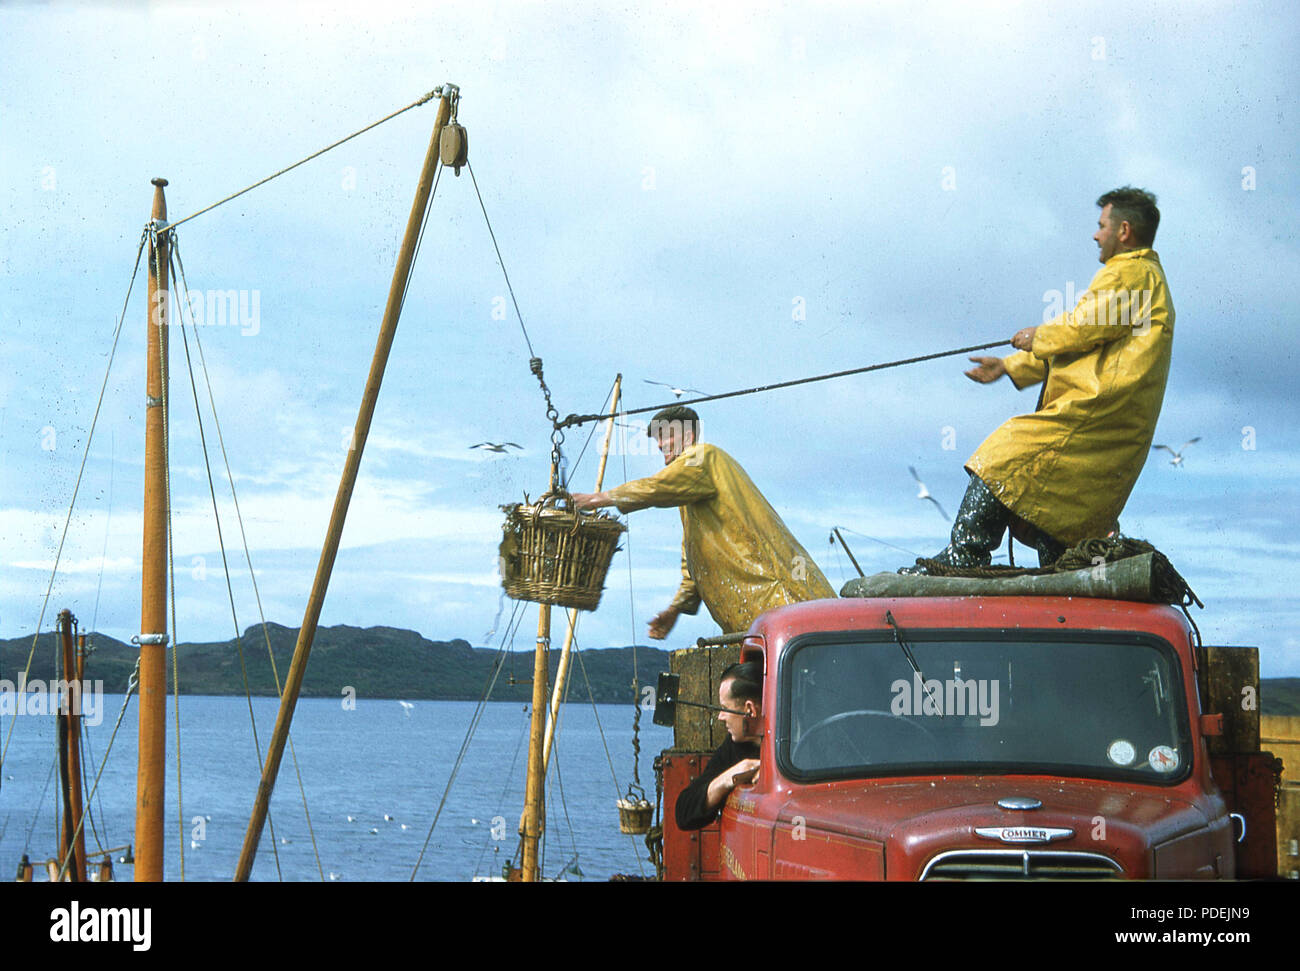 https://c8.alamy.com/comp/PDEJN9/1960s-two-fishermen-wearing-yellow-waterproof-rain-jackets-on-top-of-a-truck-at-a-jetty-using-puleys-to-unload-baskets-of-fish-atlantic-herring-from-a-boat-highlands-scotland-PDEJN9.jpg